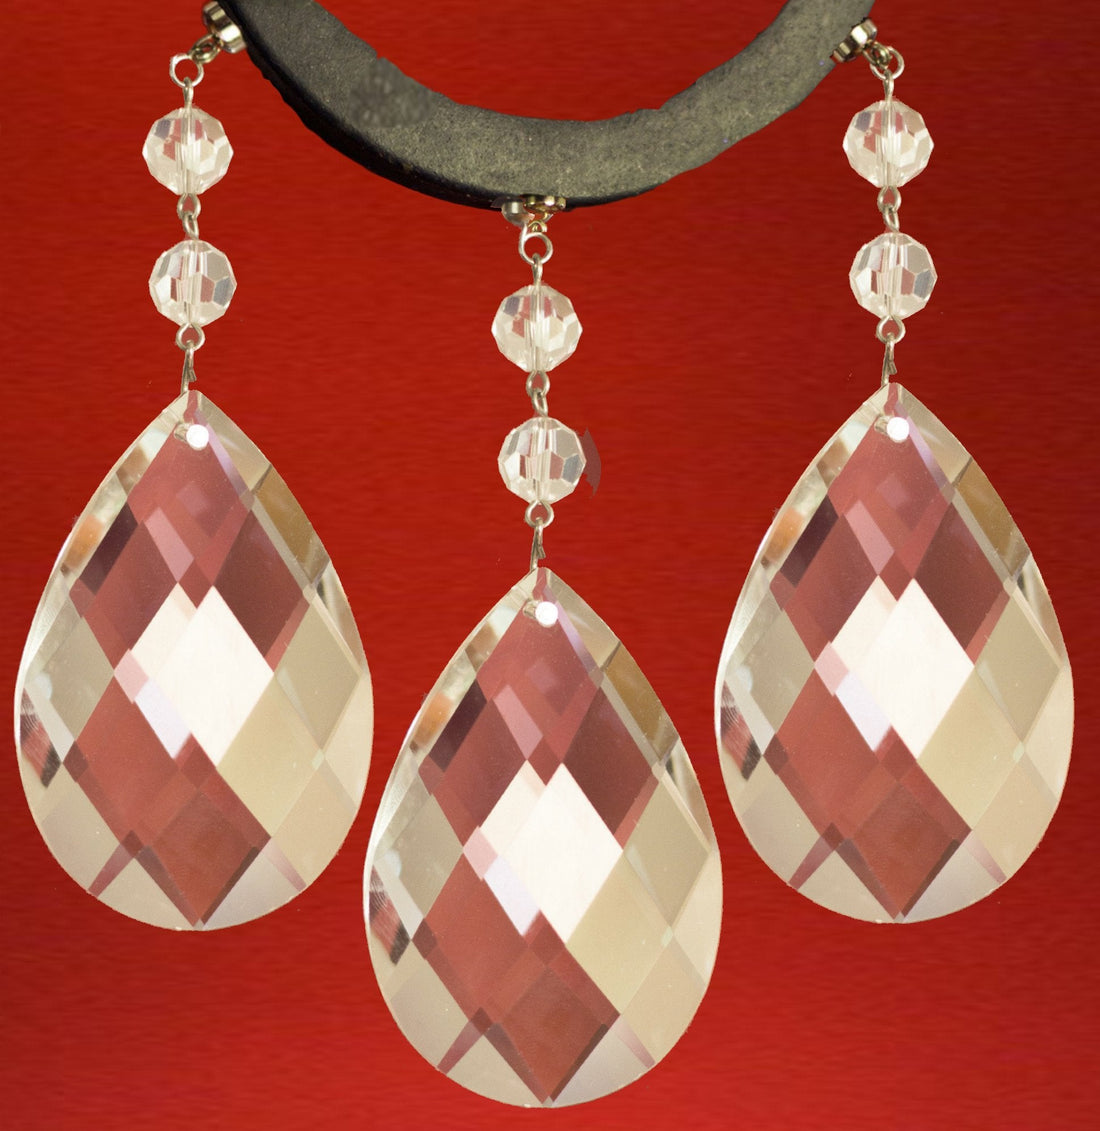 4" CLEAR FACETED WEAVED ALMOND Magnetic Chandelier Crystal (Box of 3) - MagTrim Designs LLC